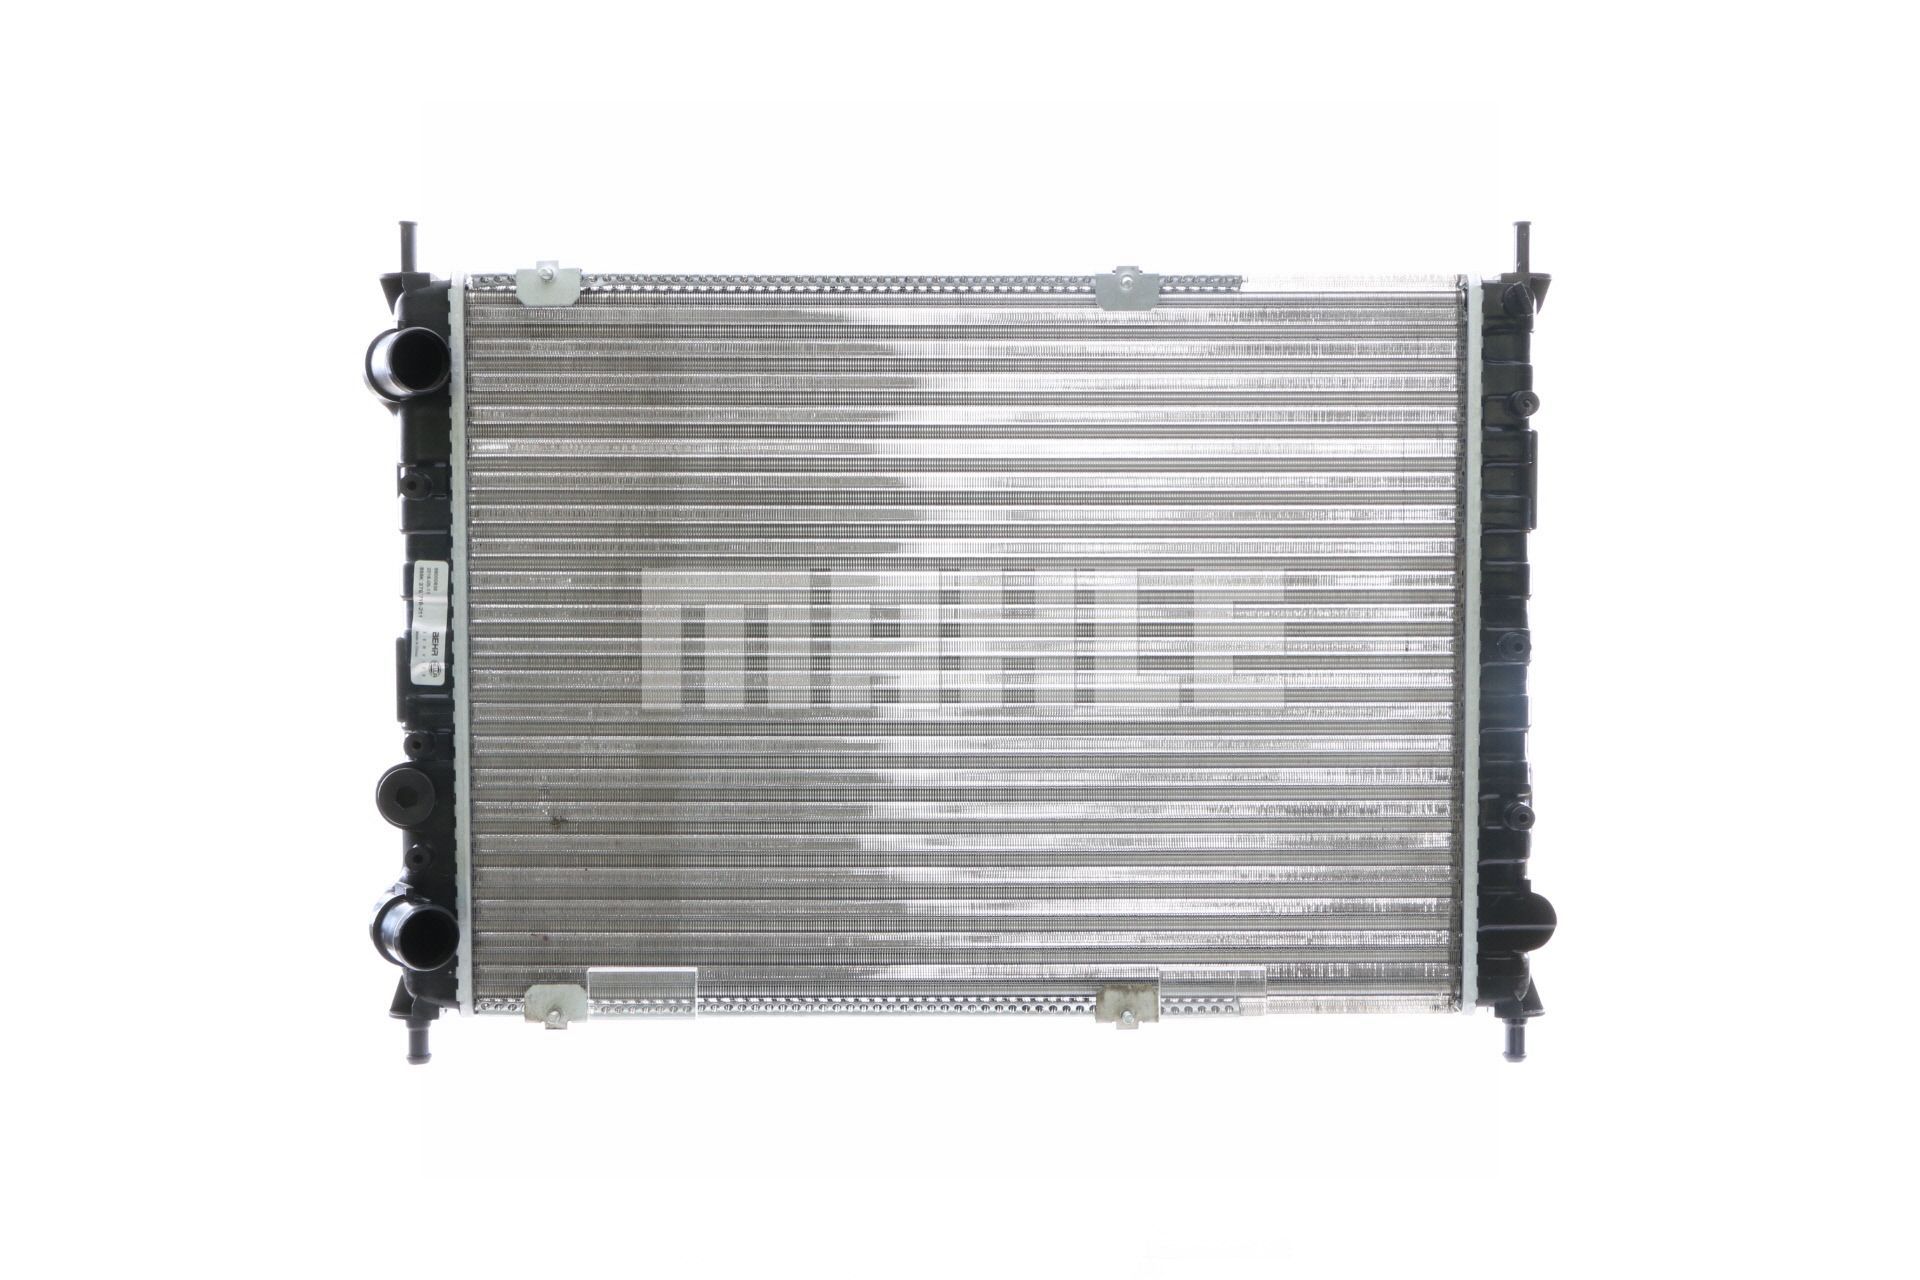 376718211 MAHLE ORIGINAL for vehicles without air conditioning, 555 x 394 x 24 mm, Manual Transmission, Mechanically jointed cooling fins Radiator CR 525 000S buy